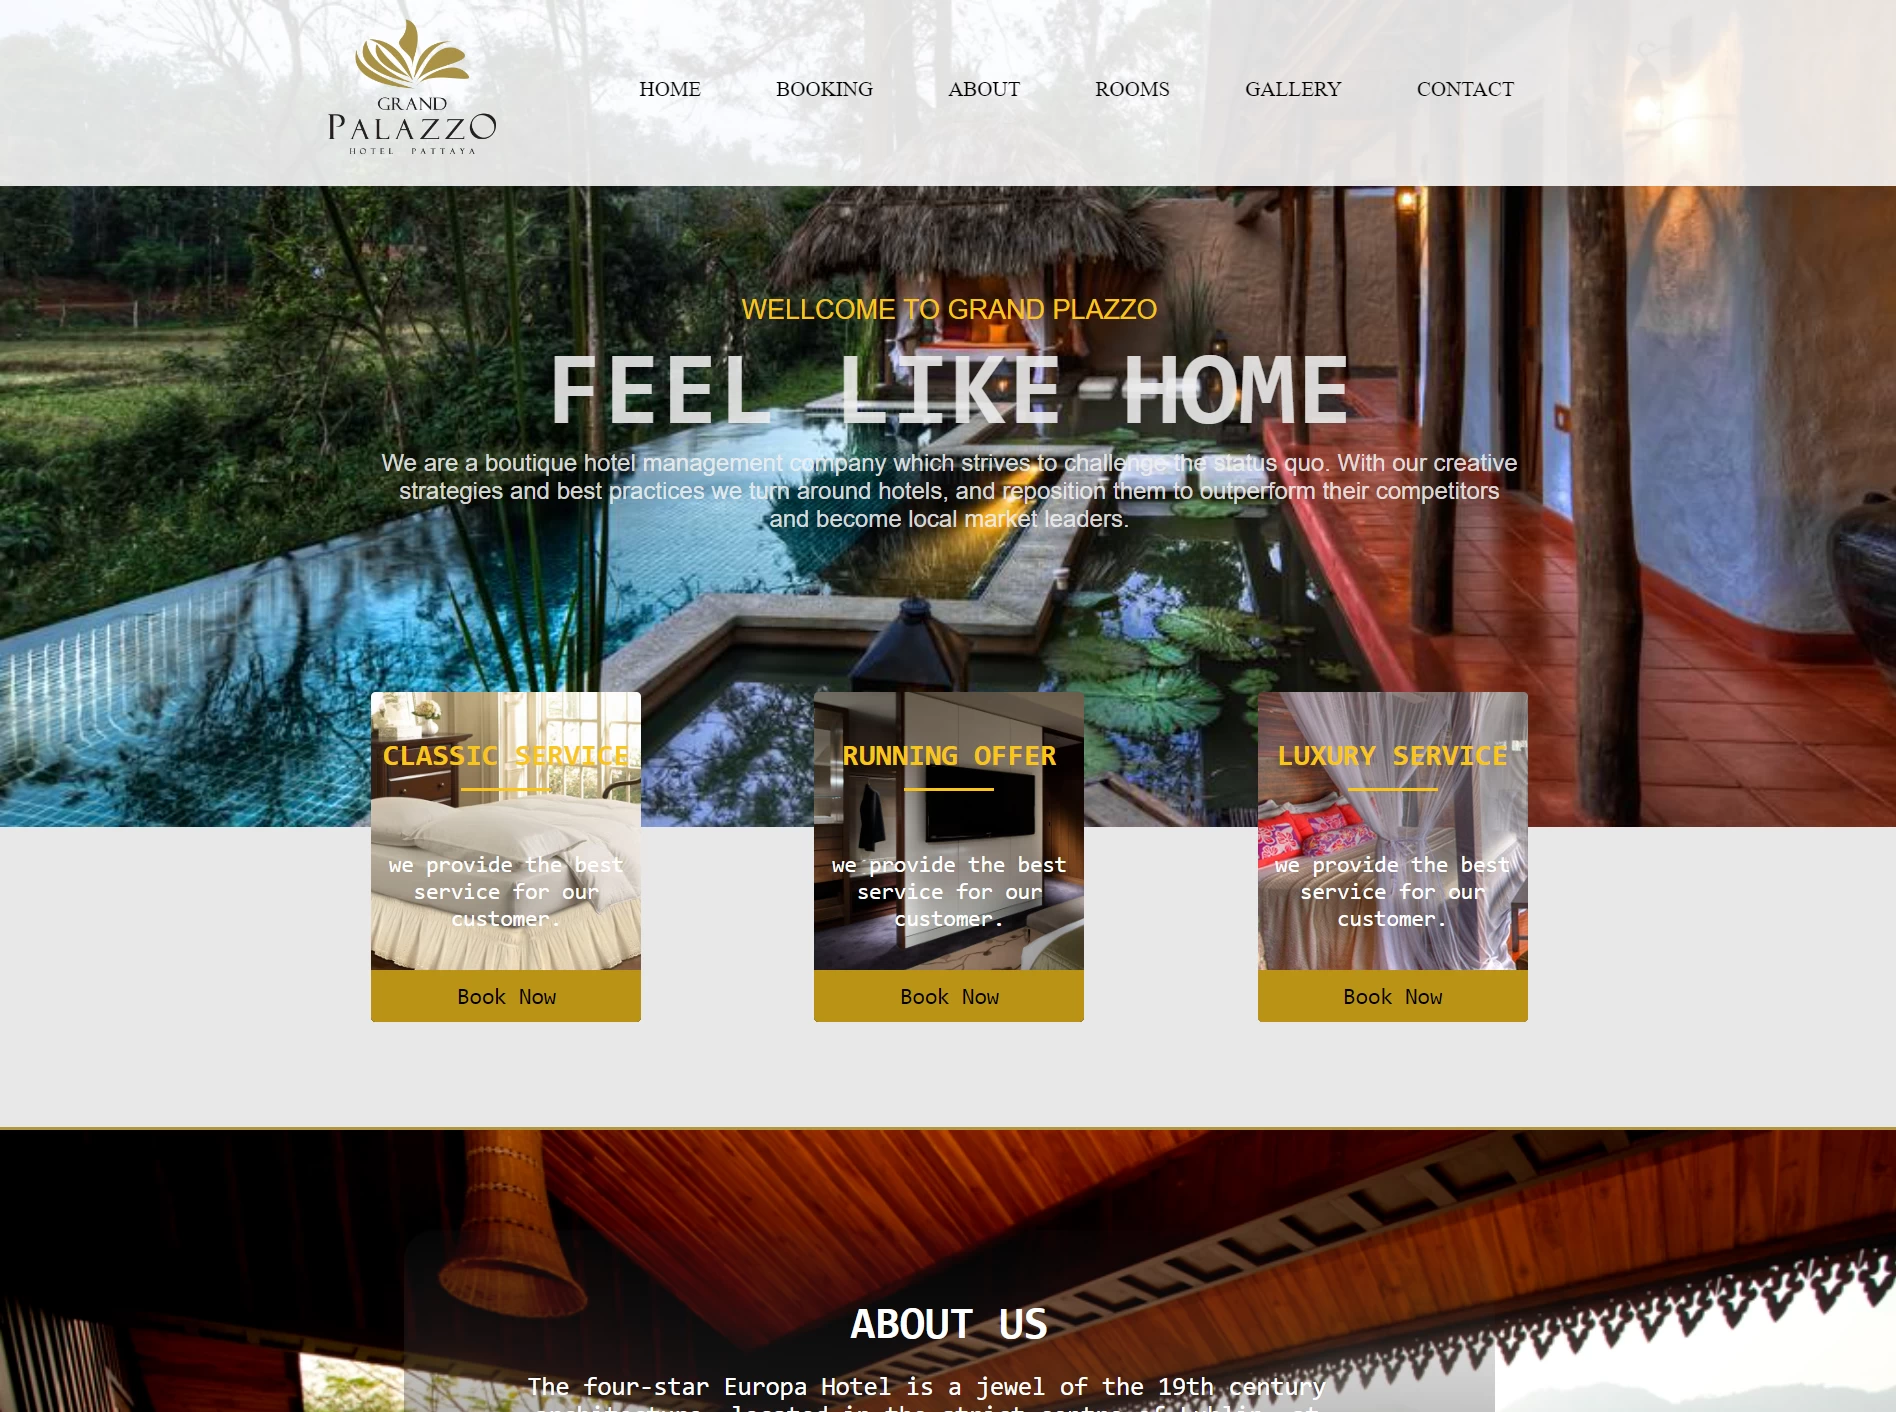 I designed a Luxurious hotel showcase and room bookable website.